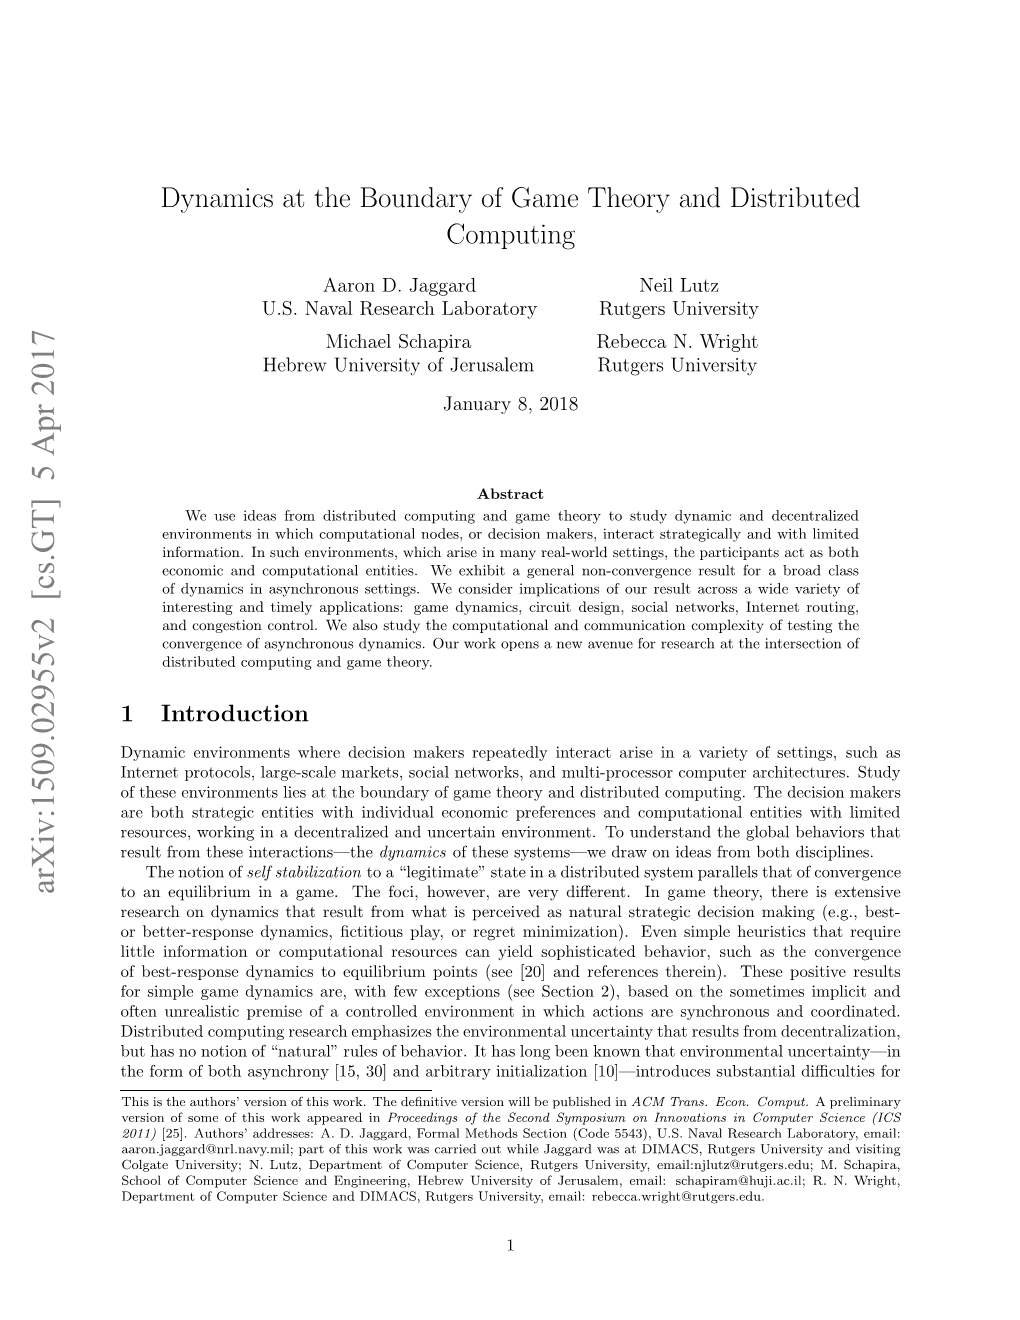 Dynamics at the Boundary of Game Theory and Distributed Computing